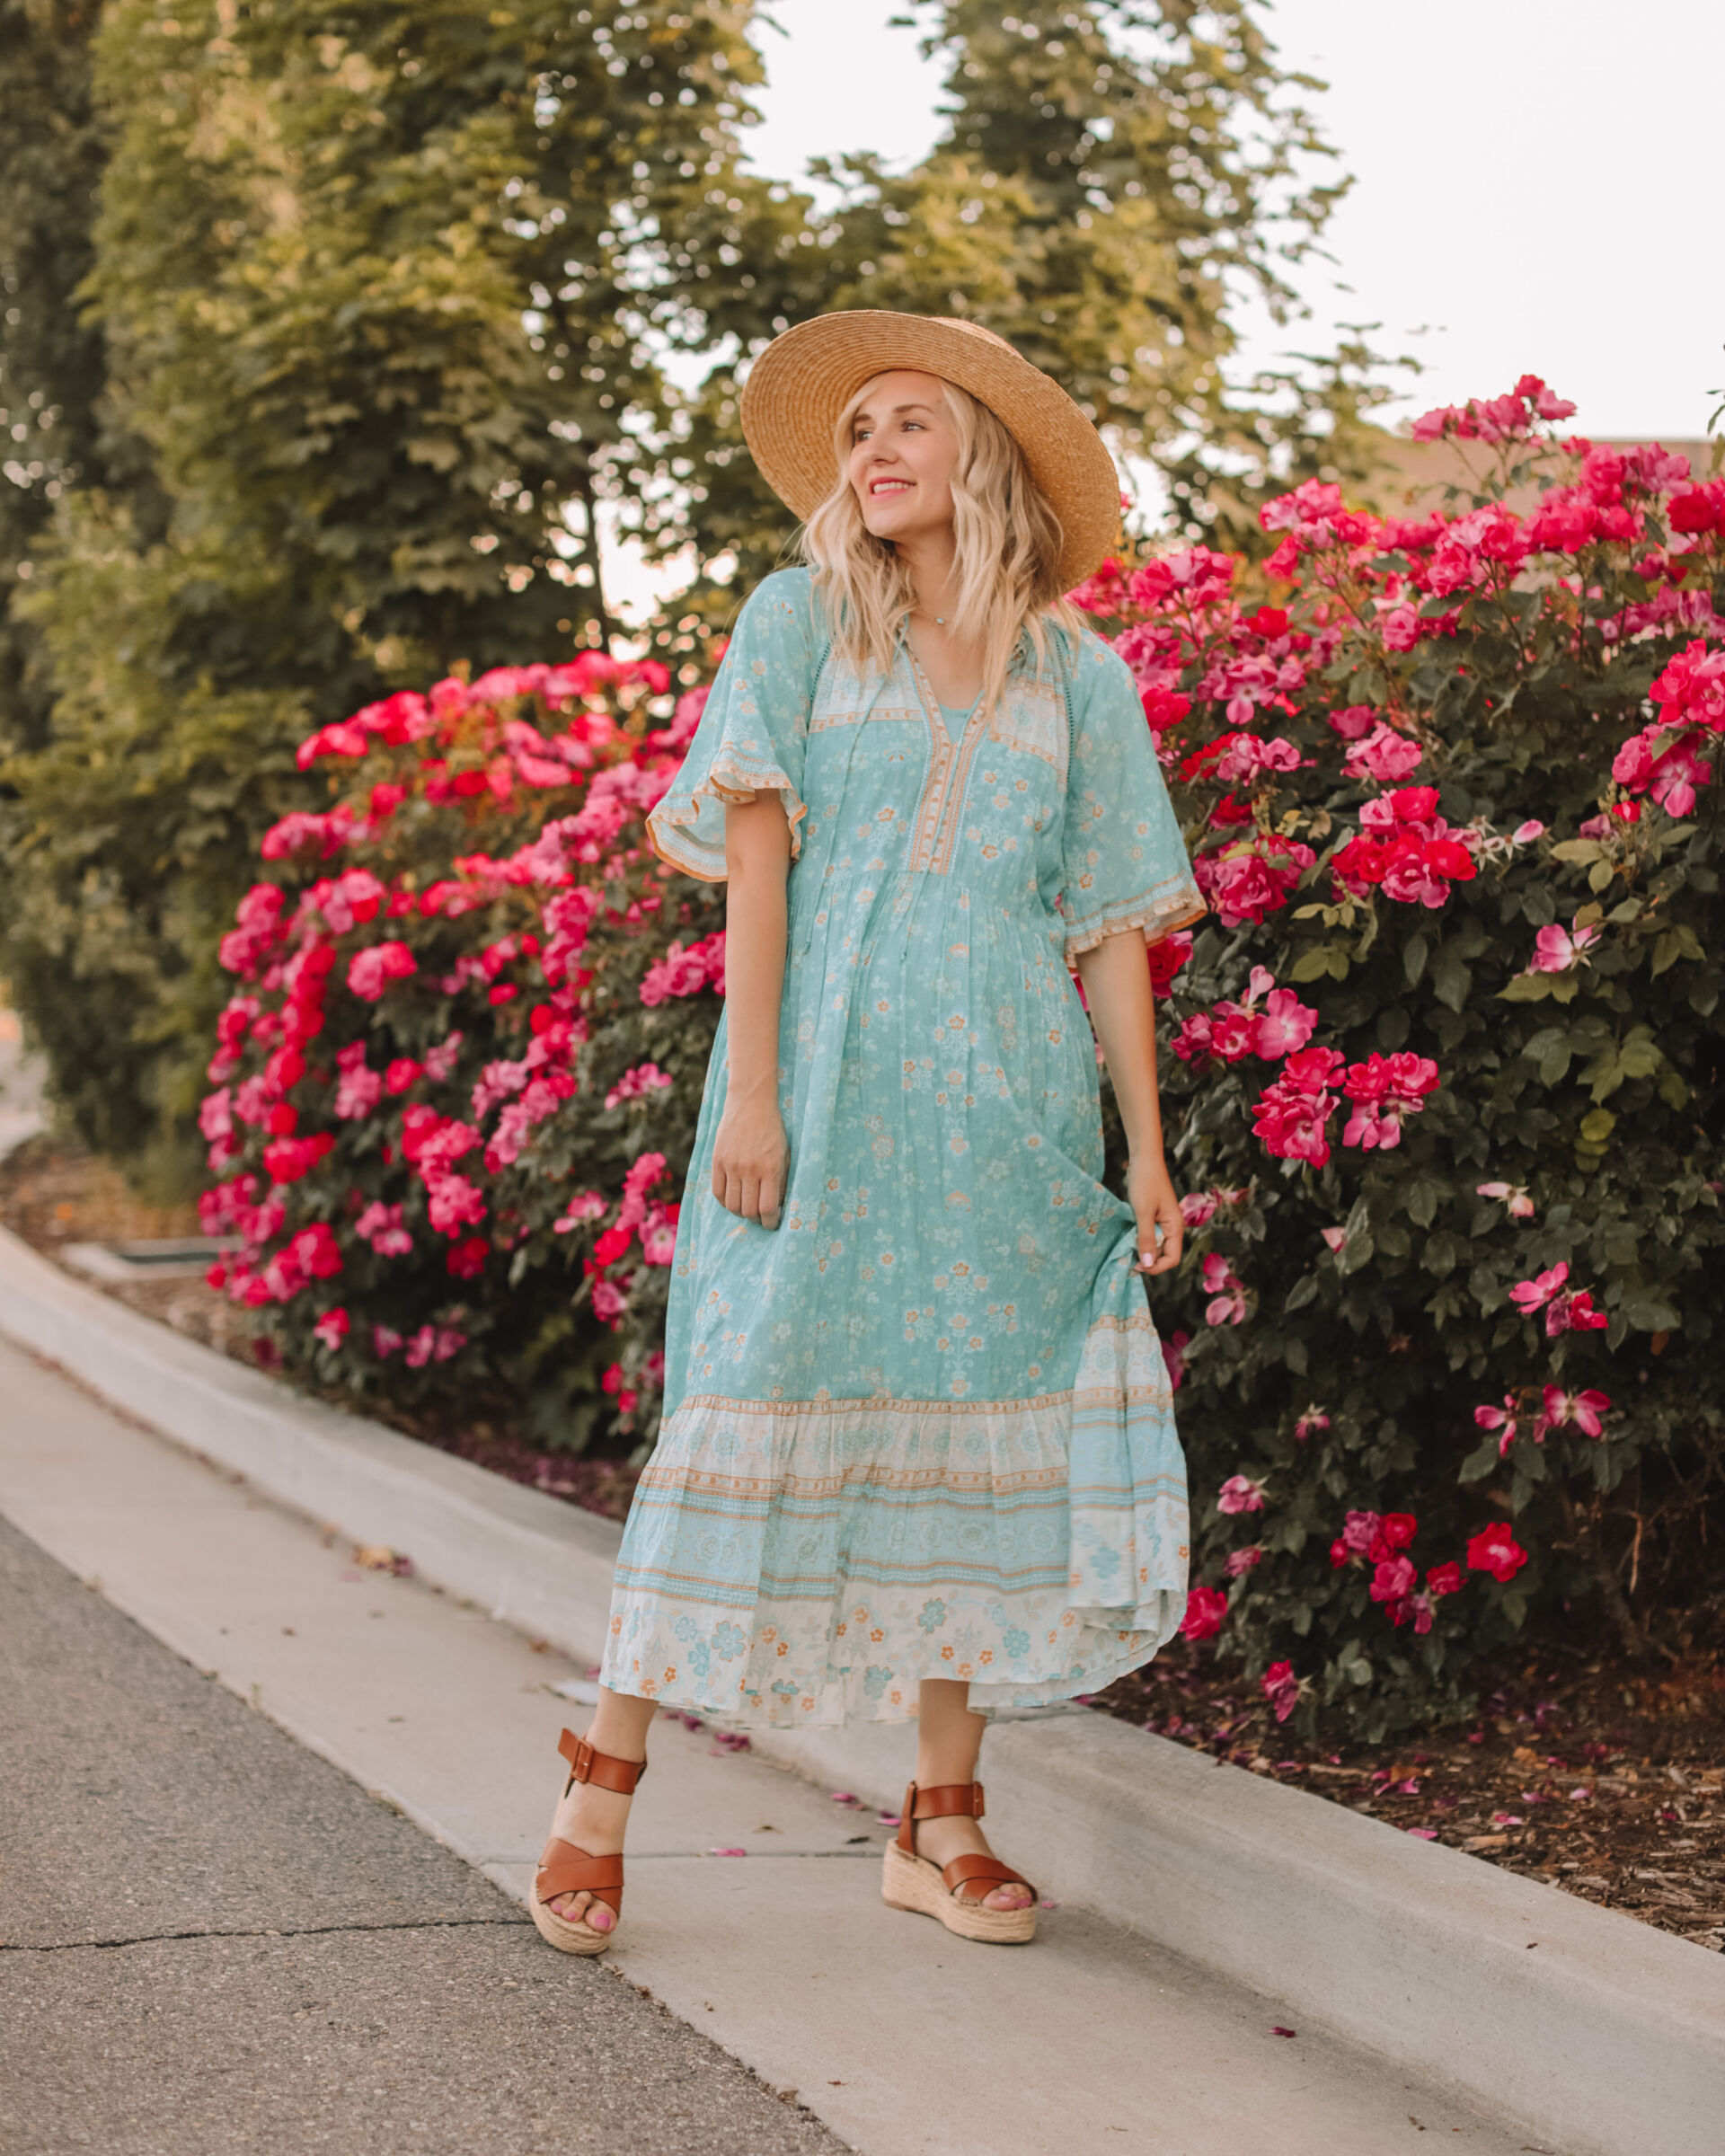 STRAW HATS + AFFORDABLE SUMMER STYLE FINDS - Stripes in Bloom